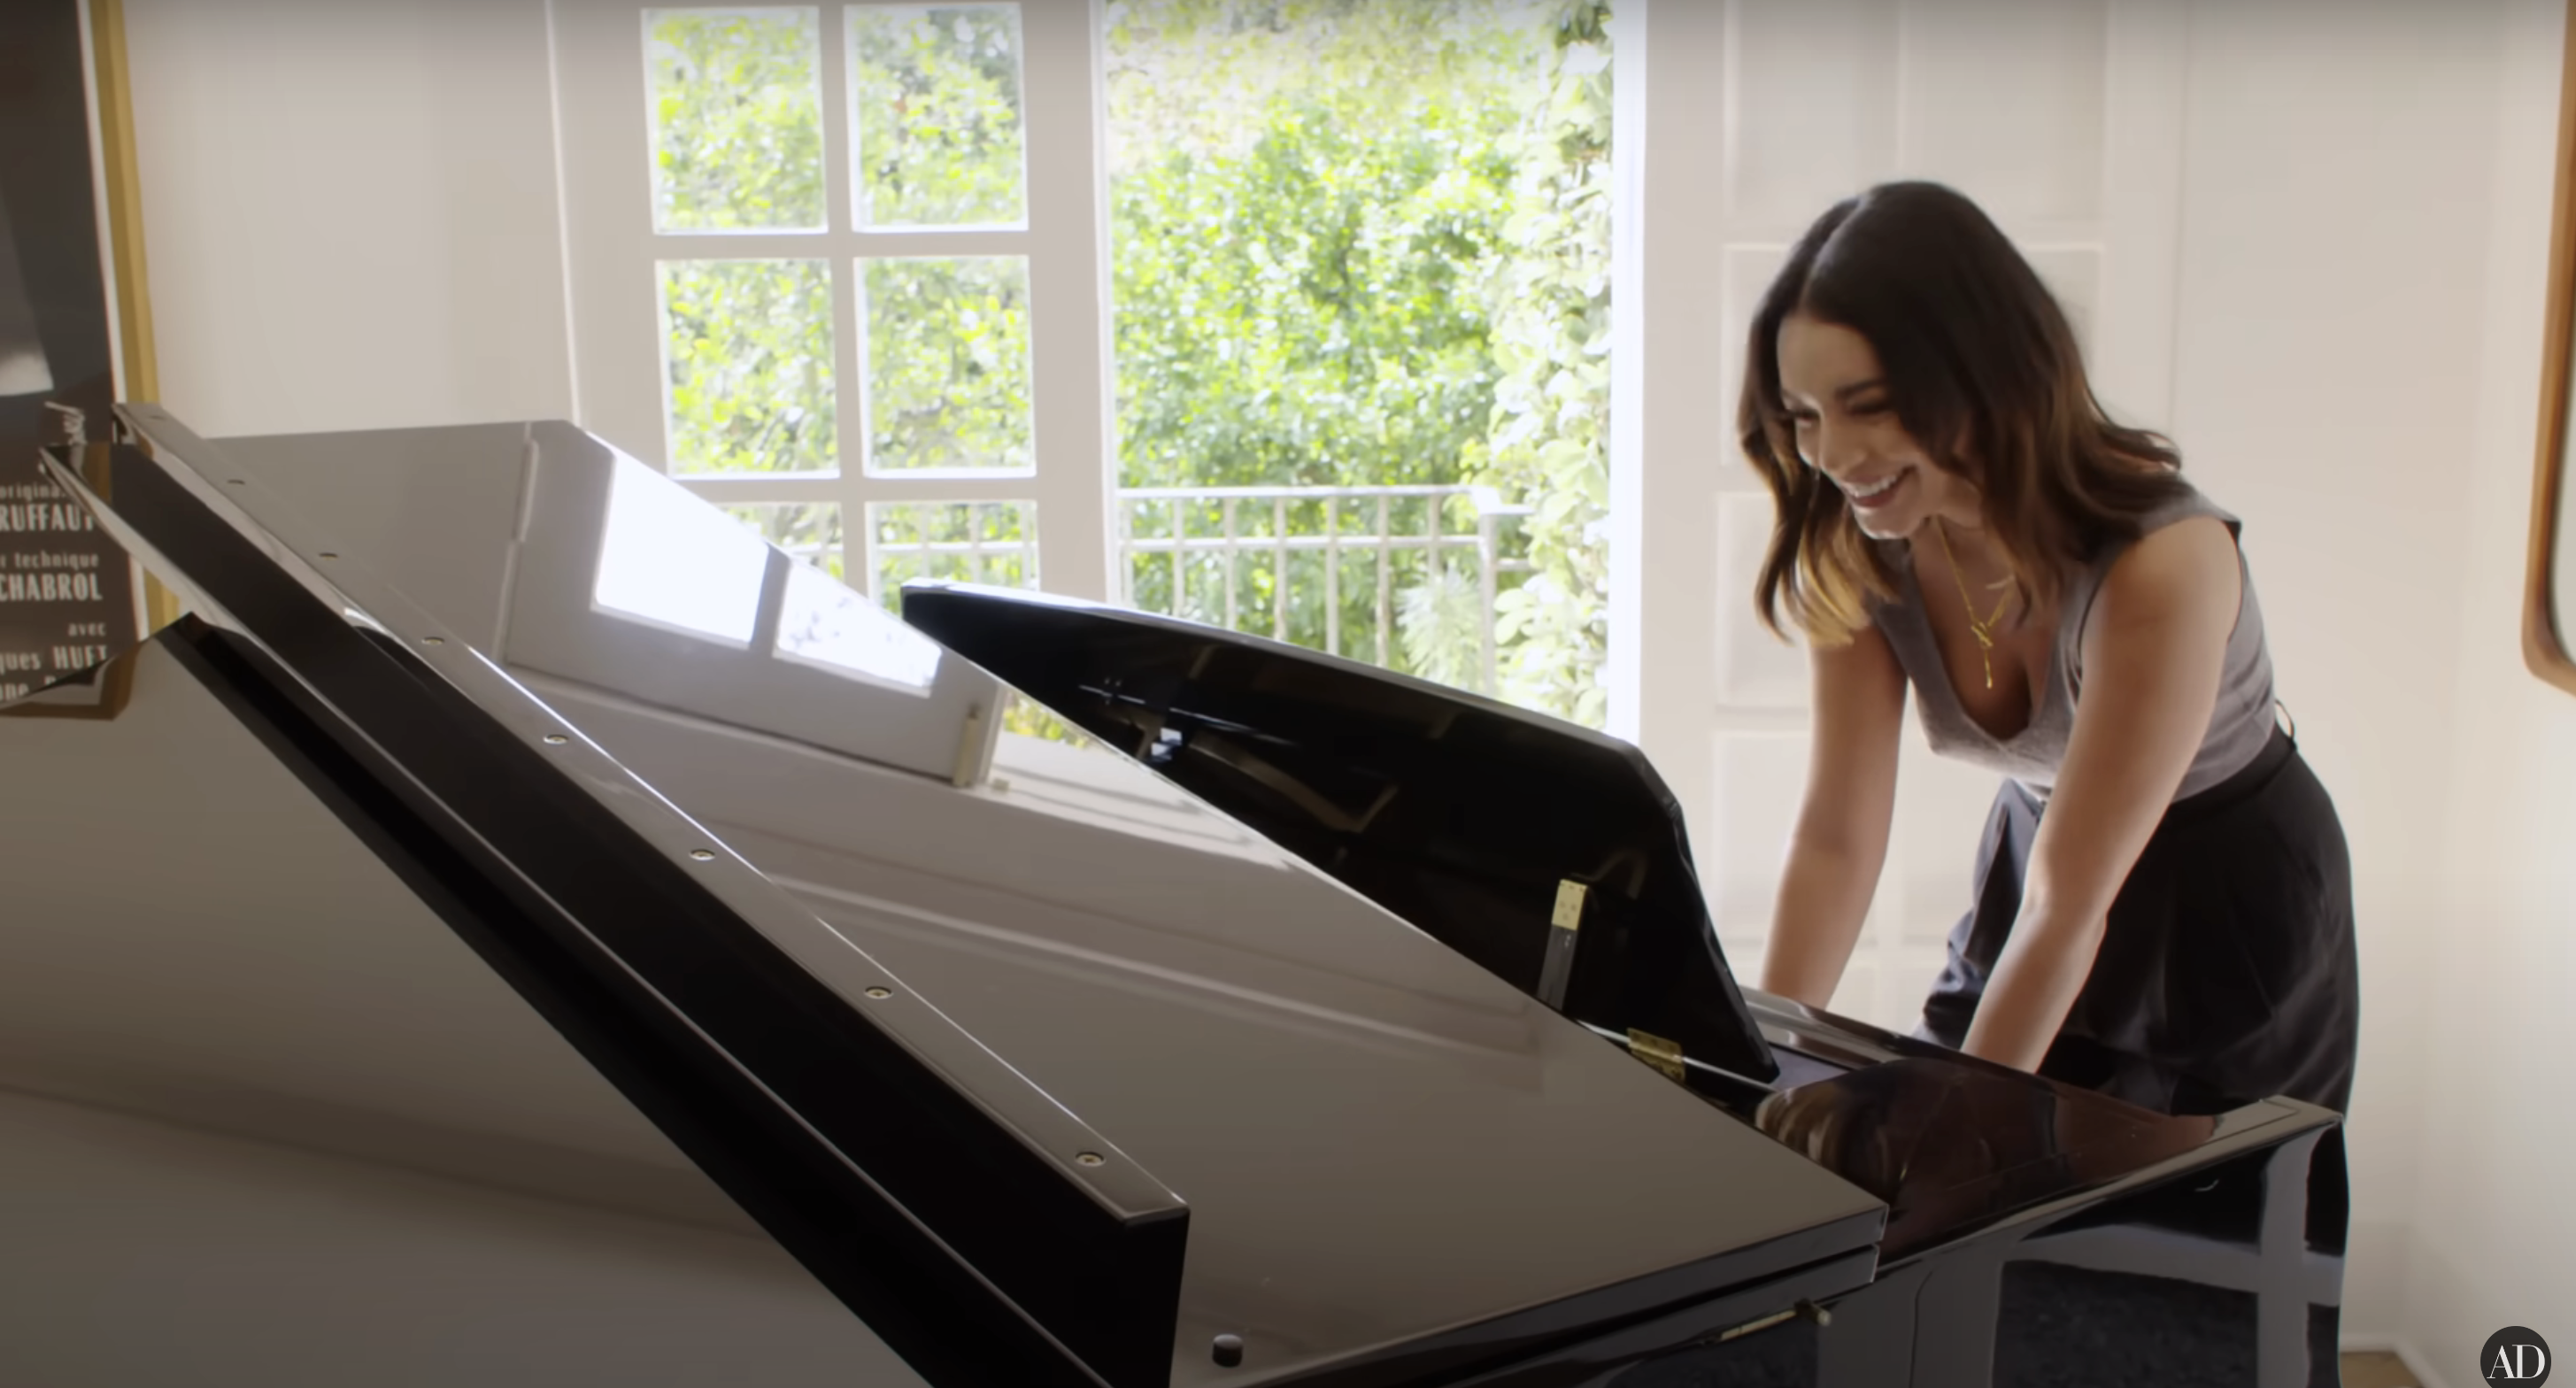 Vanessa Hudgens smiles while playfully posing with a grand piano in a sunlit room